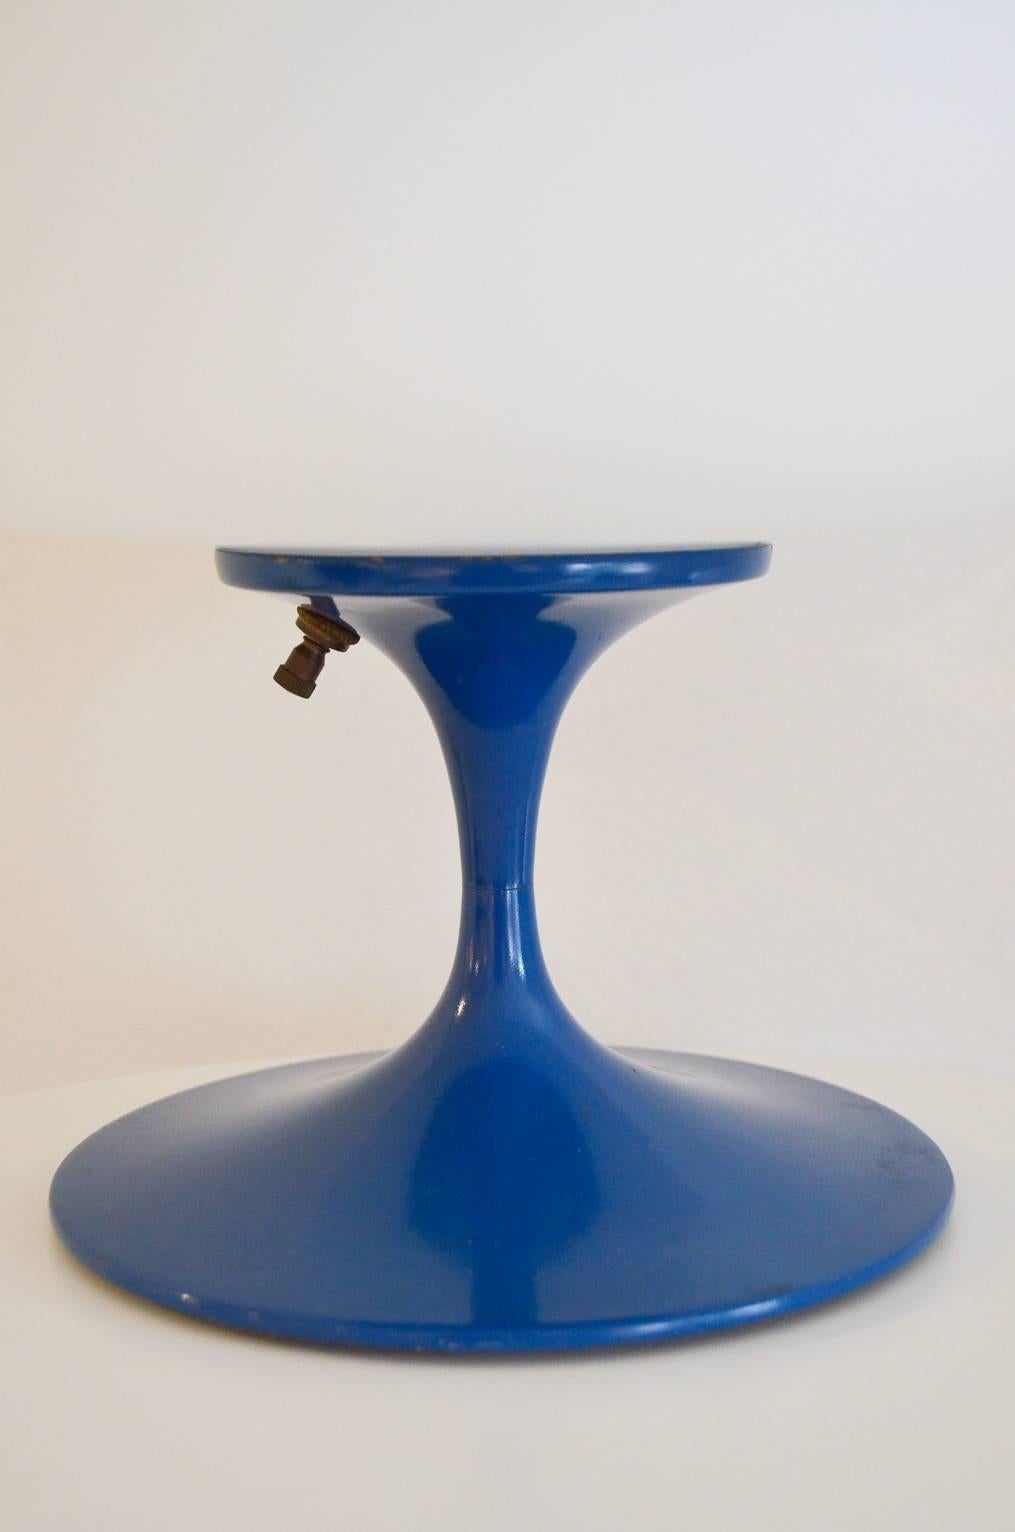 Original Laurel mushroom lamp with rare blue base. Beautiful soft light, these classic lamps never go out of style, and the perfect addition to your home.

Hardly any wear to the base, it is in near perfect condition and the inner ceramic socket